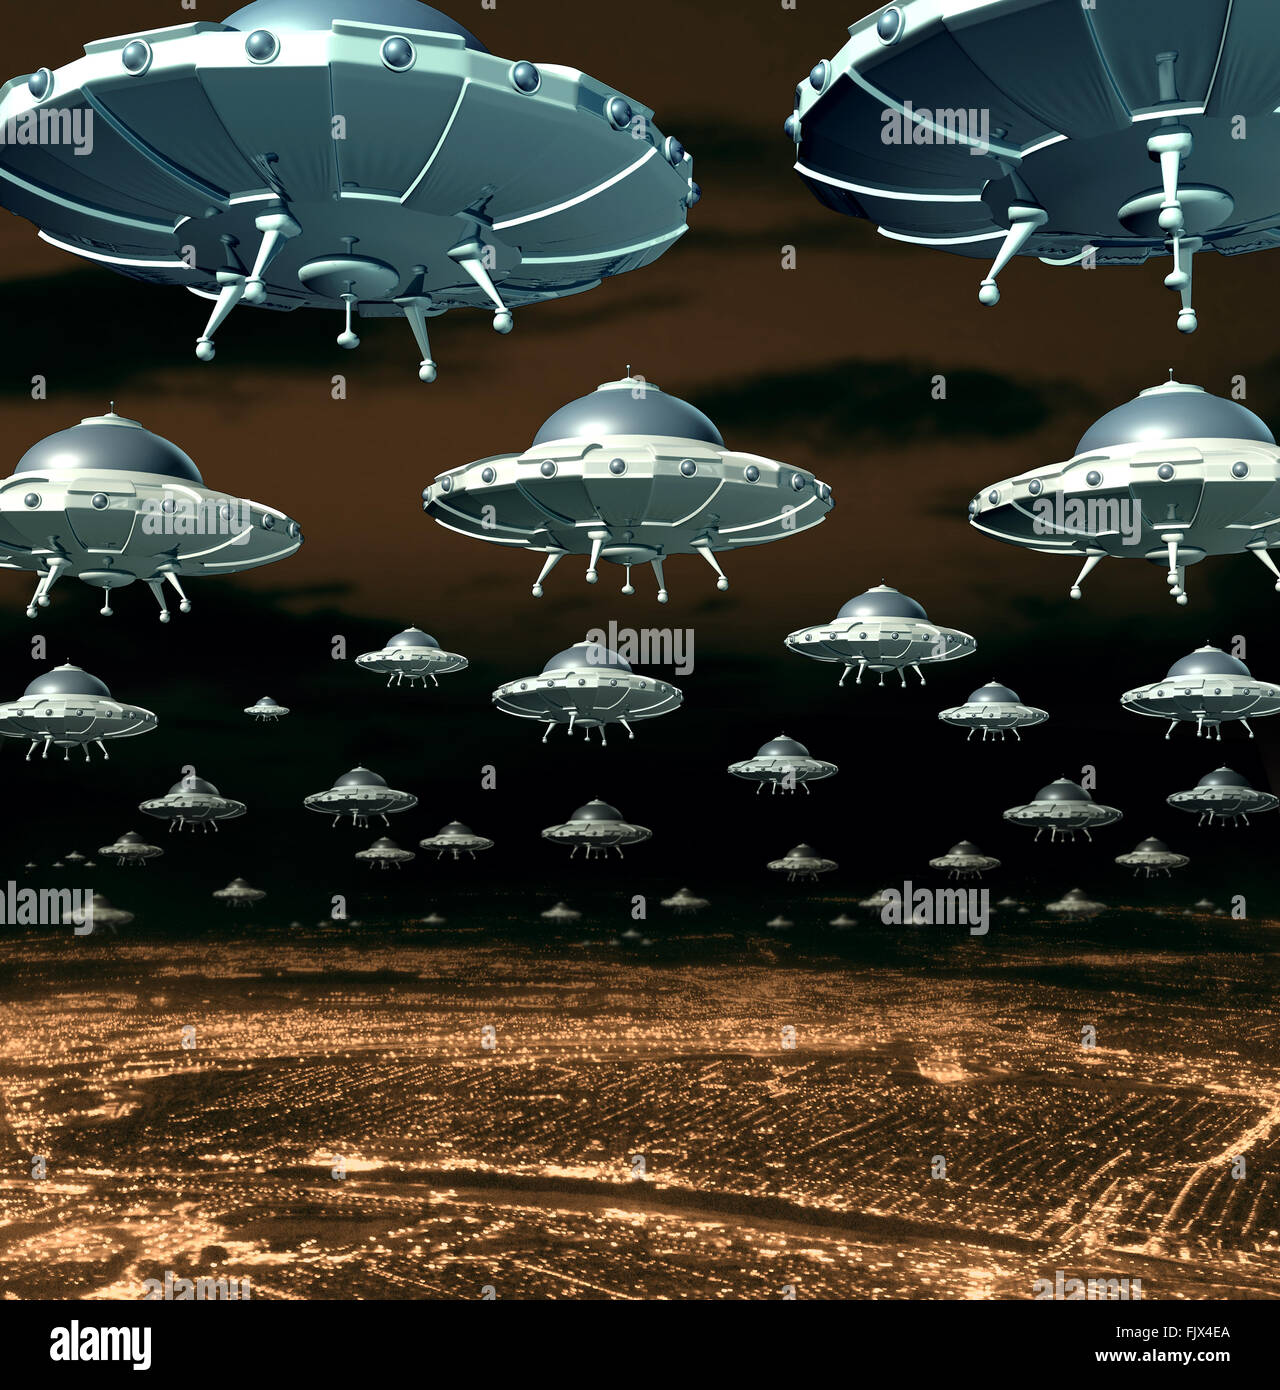 Alien invasion concept as a menacing group of invading flying saucers and spaceships over a city as science fiction ufo extraterrestrial hover crafts from outer space taking over the planet earth. Stock Photo